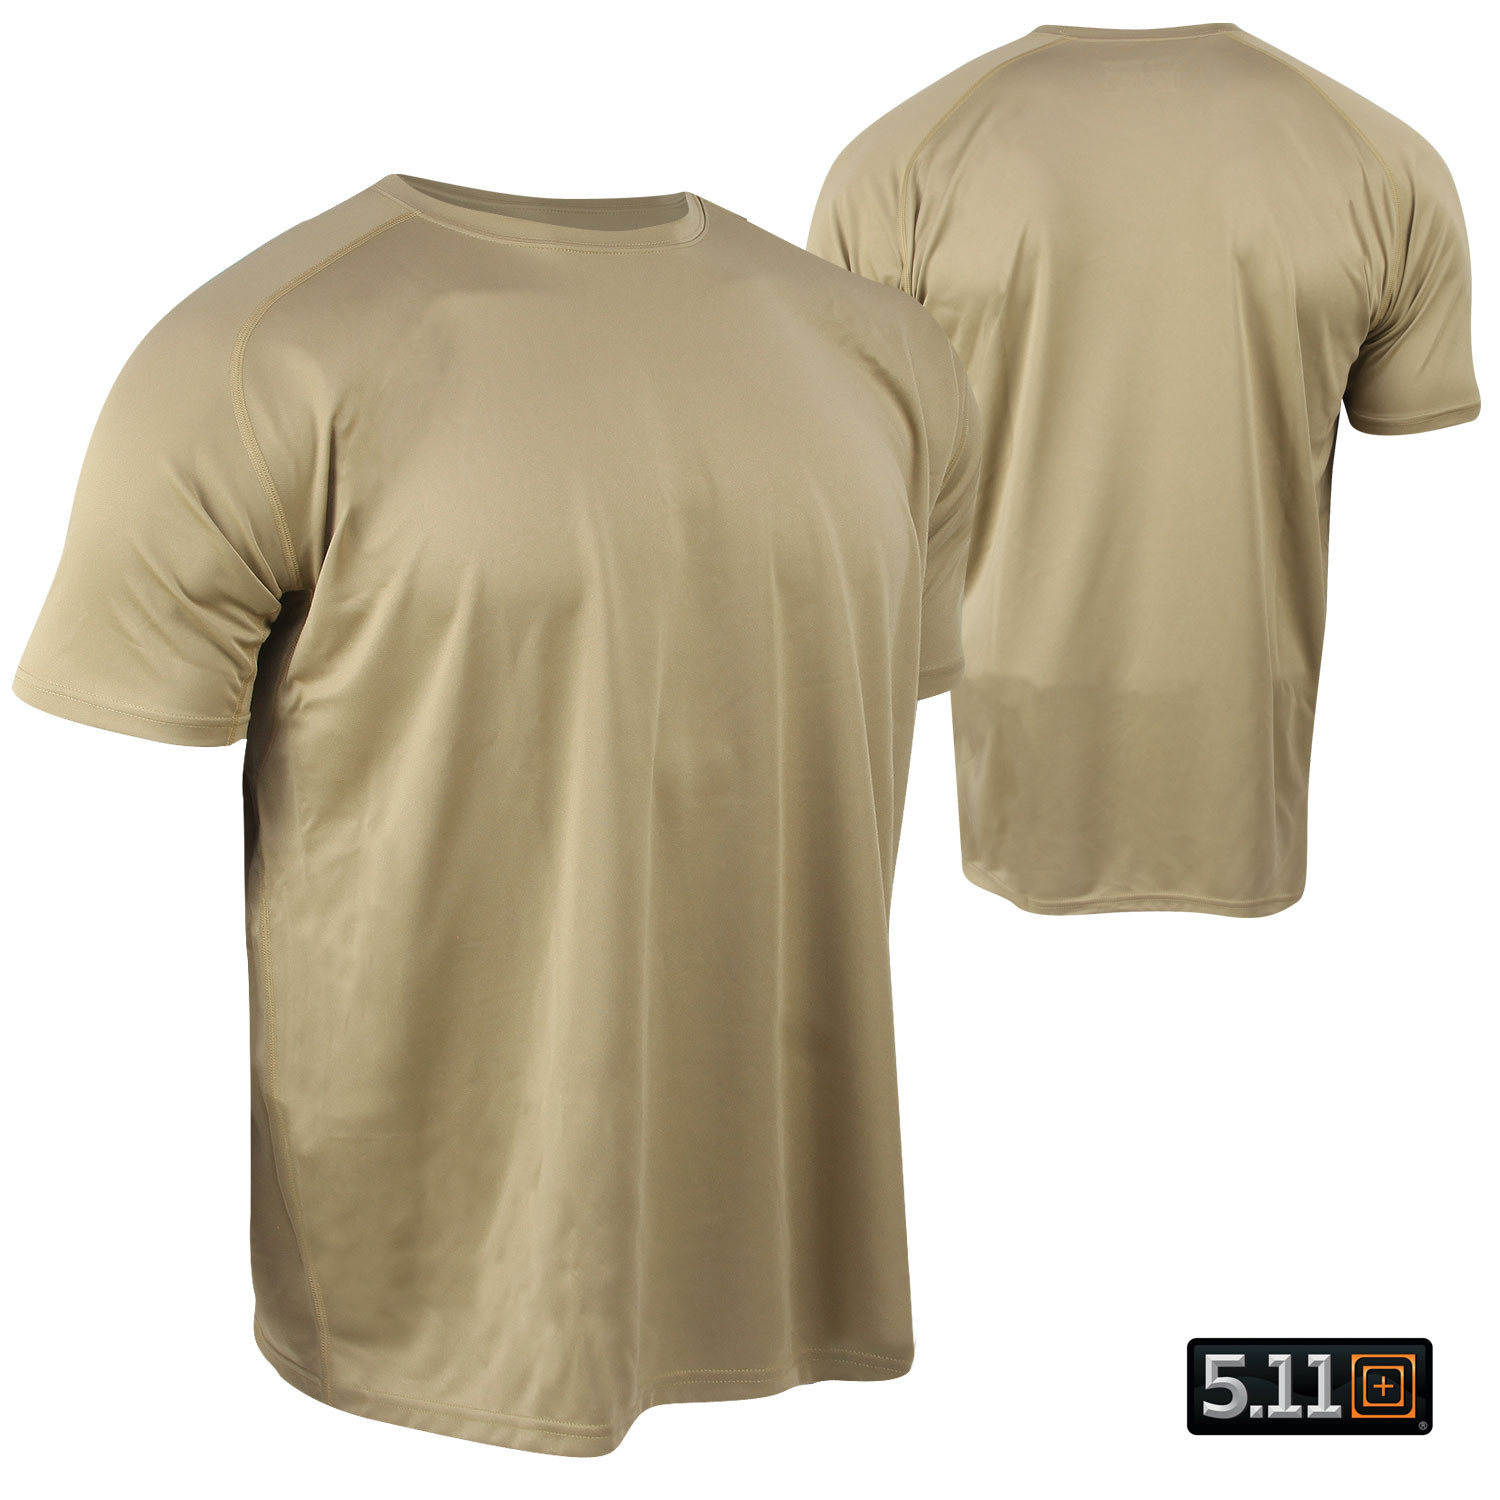 5.11 Tactical Loose Fit T-Shirt - Tan | Wing Supply